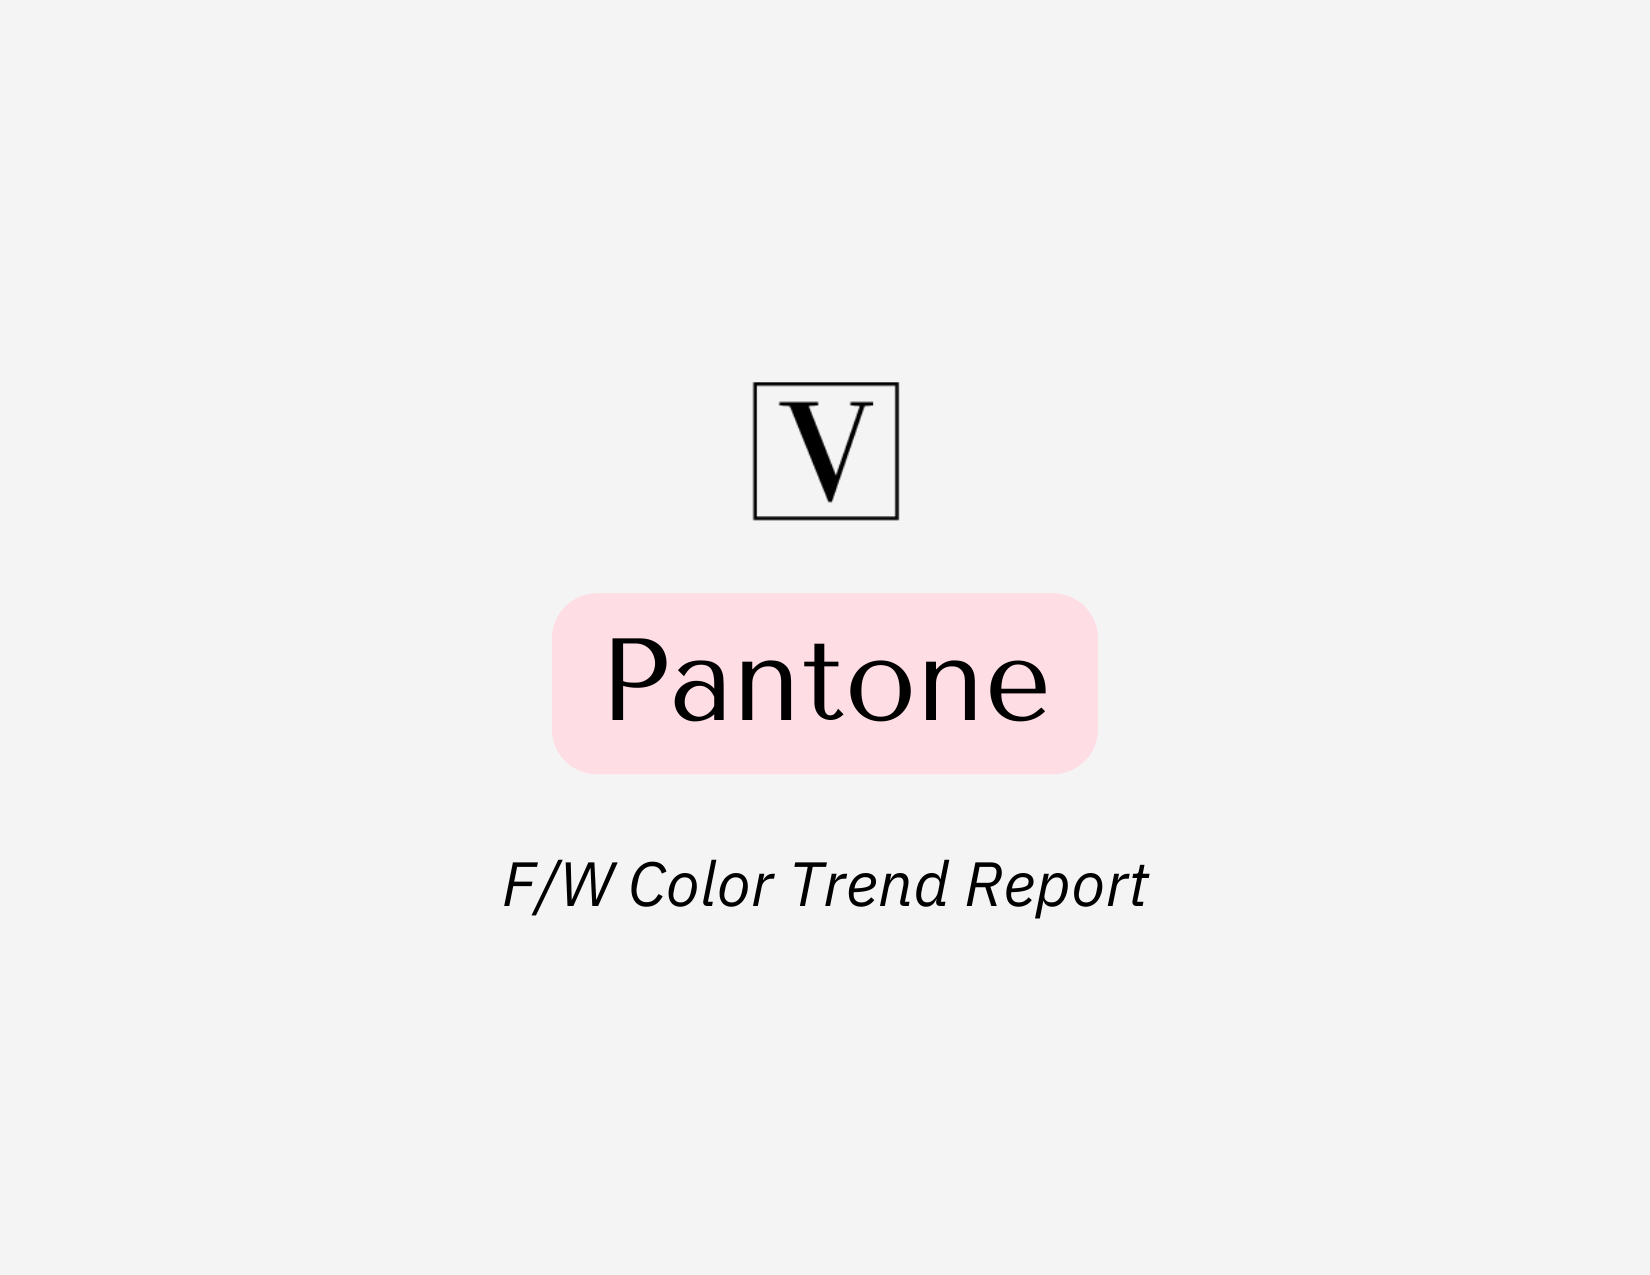 Fall-winter 2023-2024 trends: The trendy colors this season